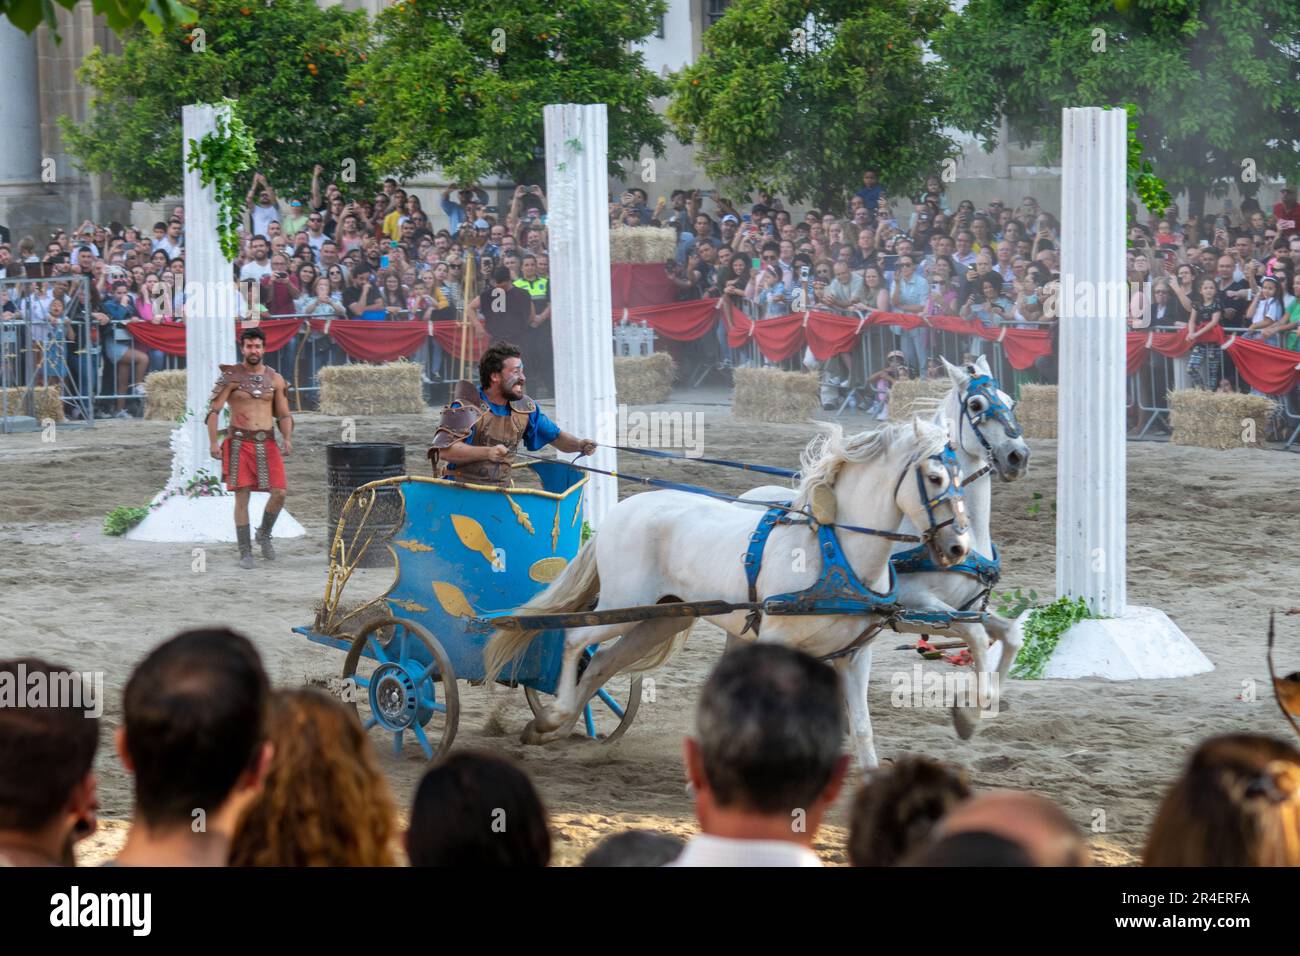 Roman gladiator race and roman gladiator fighting games. Braga Romana event in the city of Braga, at north Portugal. History and culture. Stock Photo